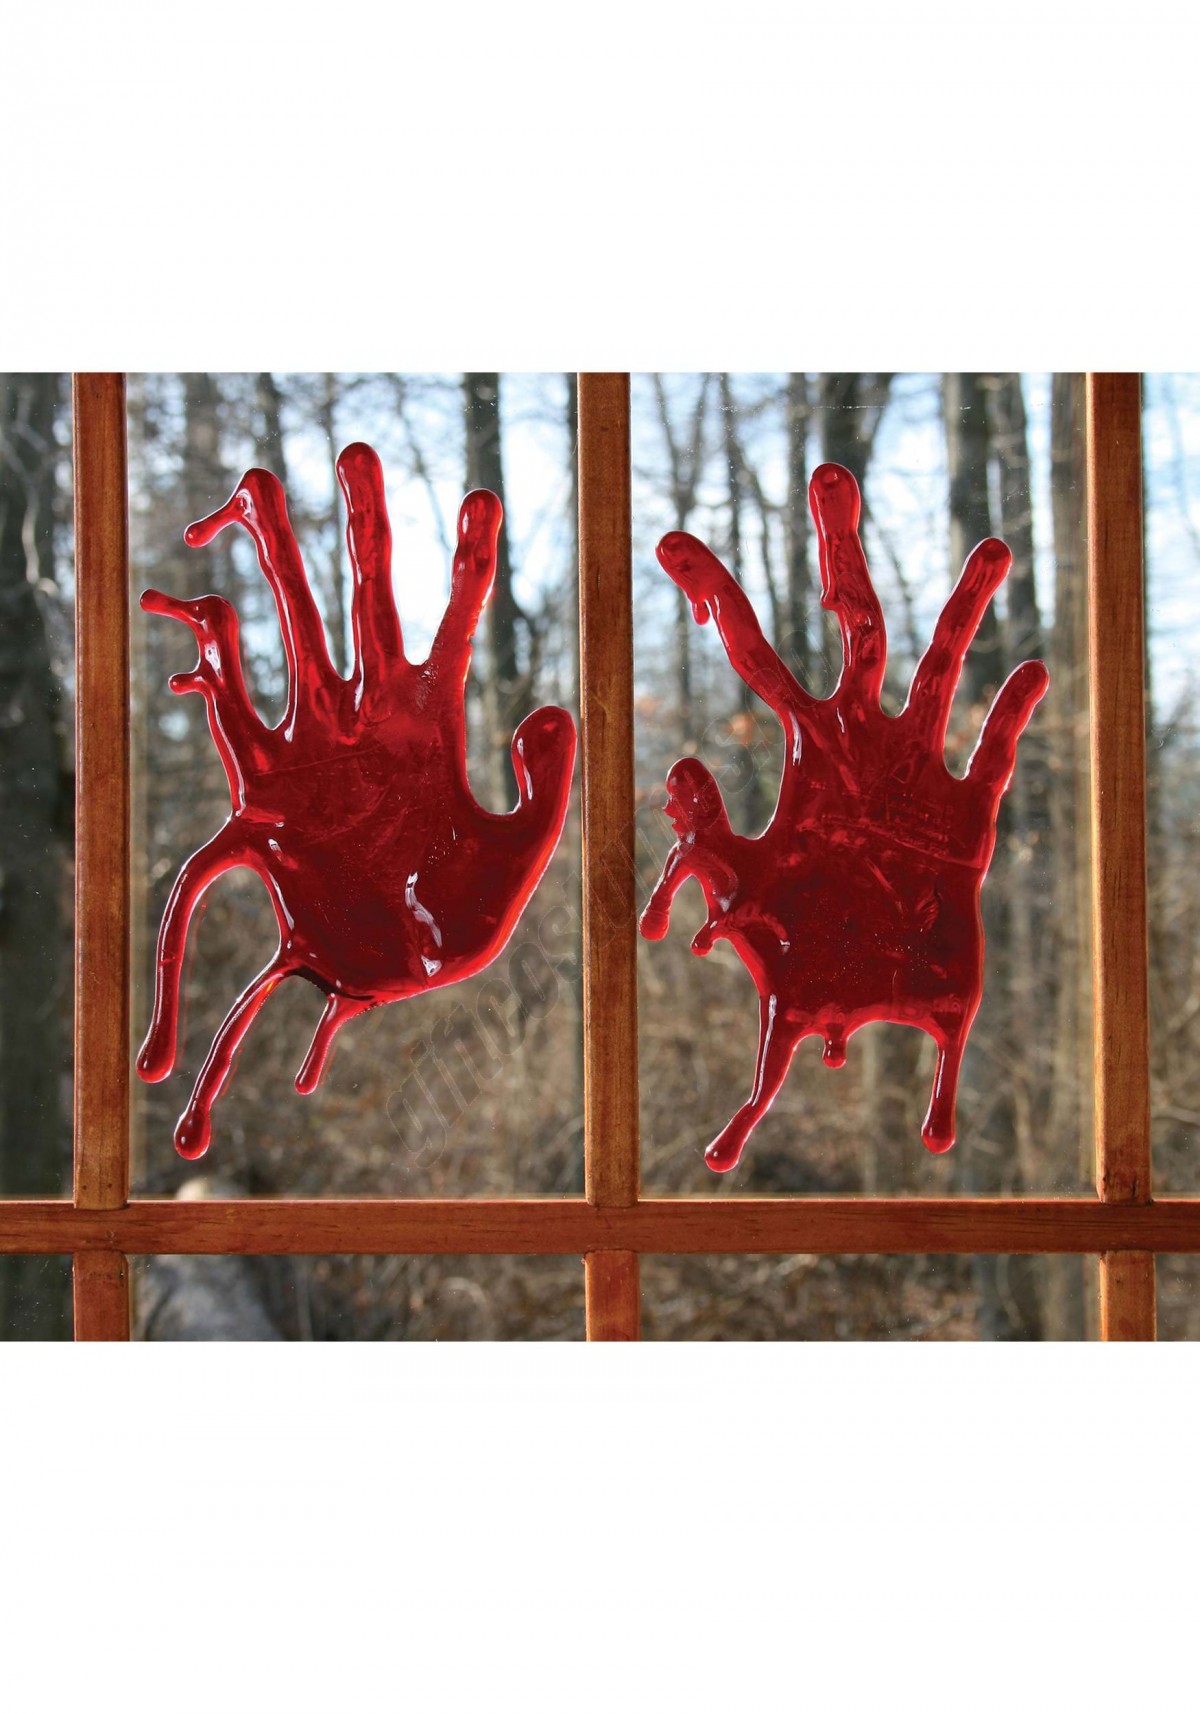 Bloody Window Hand Print Cling Promotions - -1